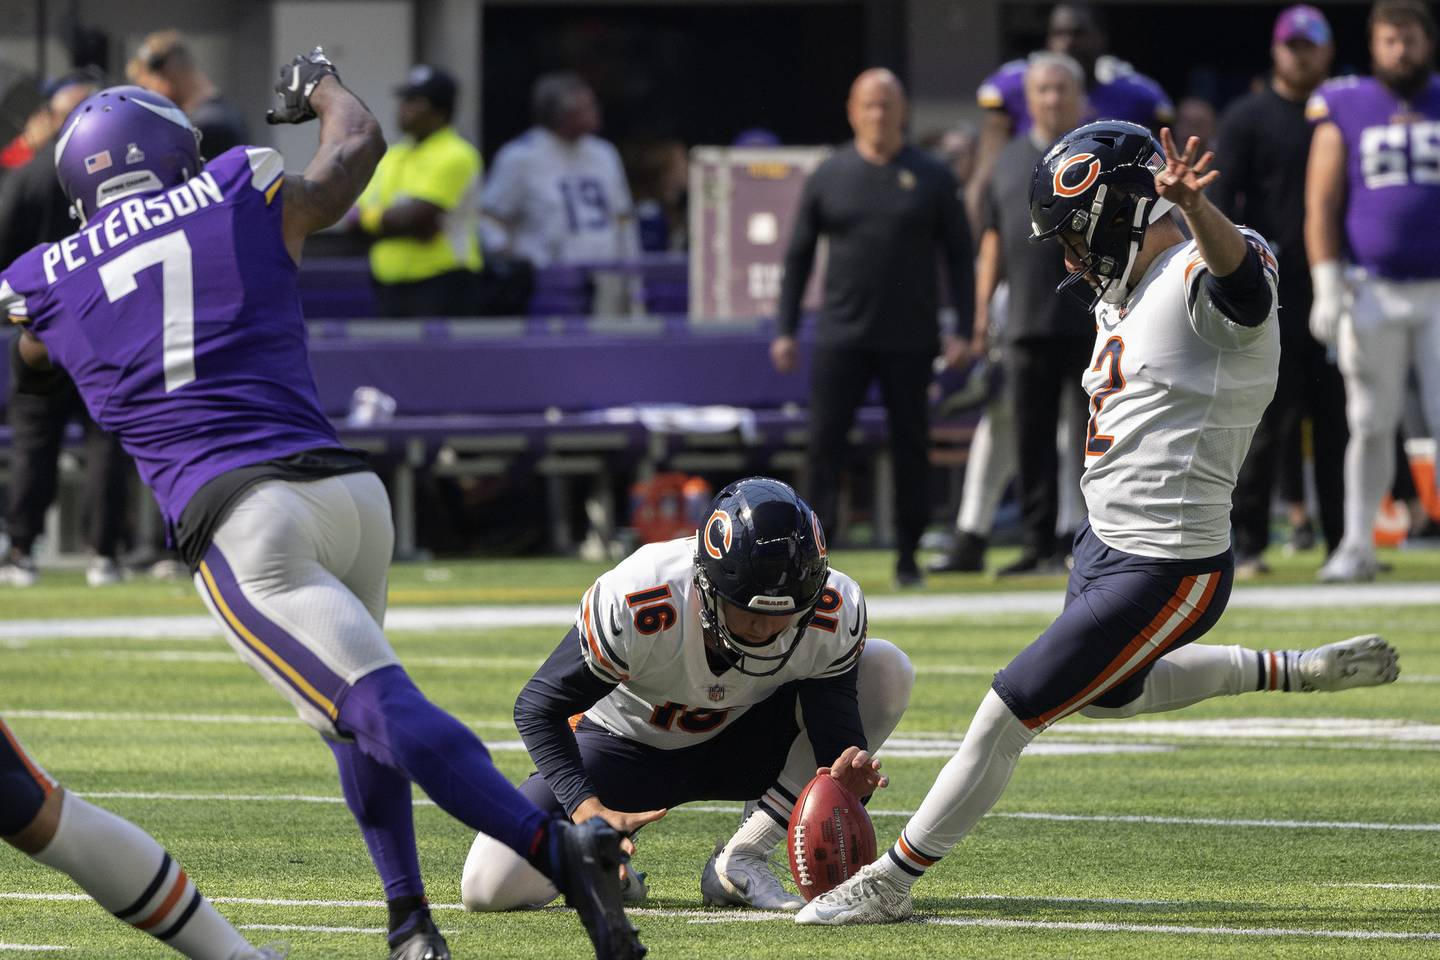 Bears kicker Cairo Santos with a successful field goal against the Vikings at U.S Bank Stadium on Oct. 9, 2022.